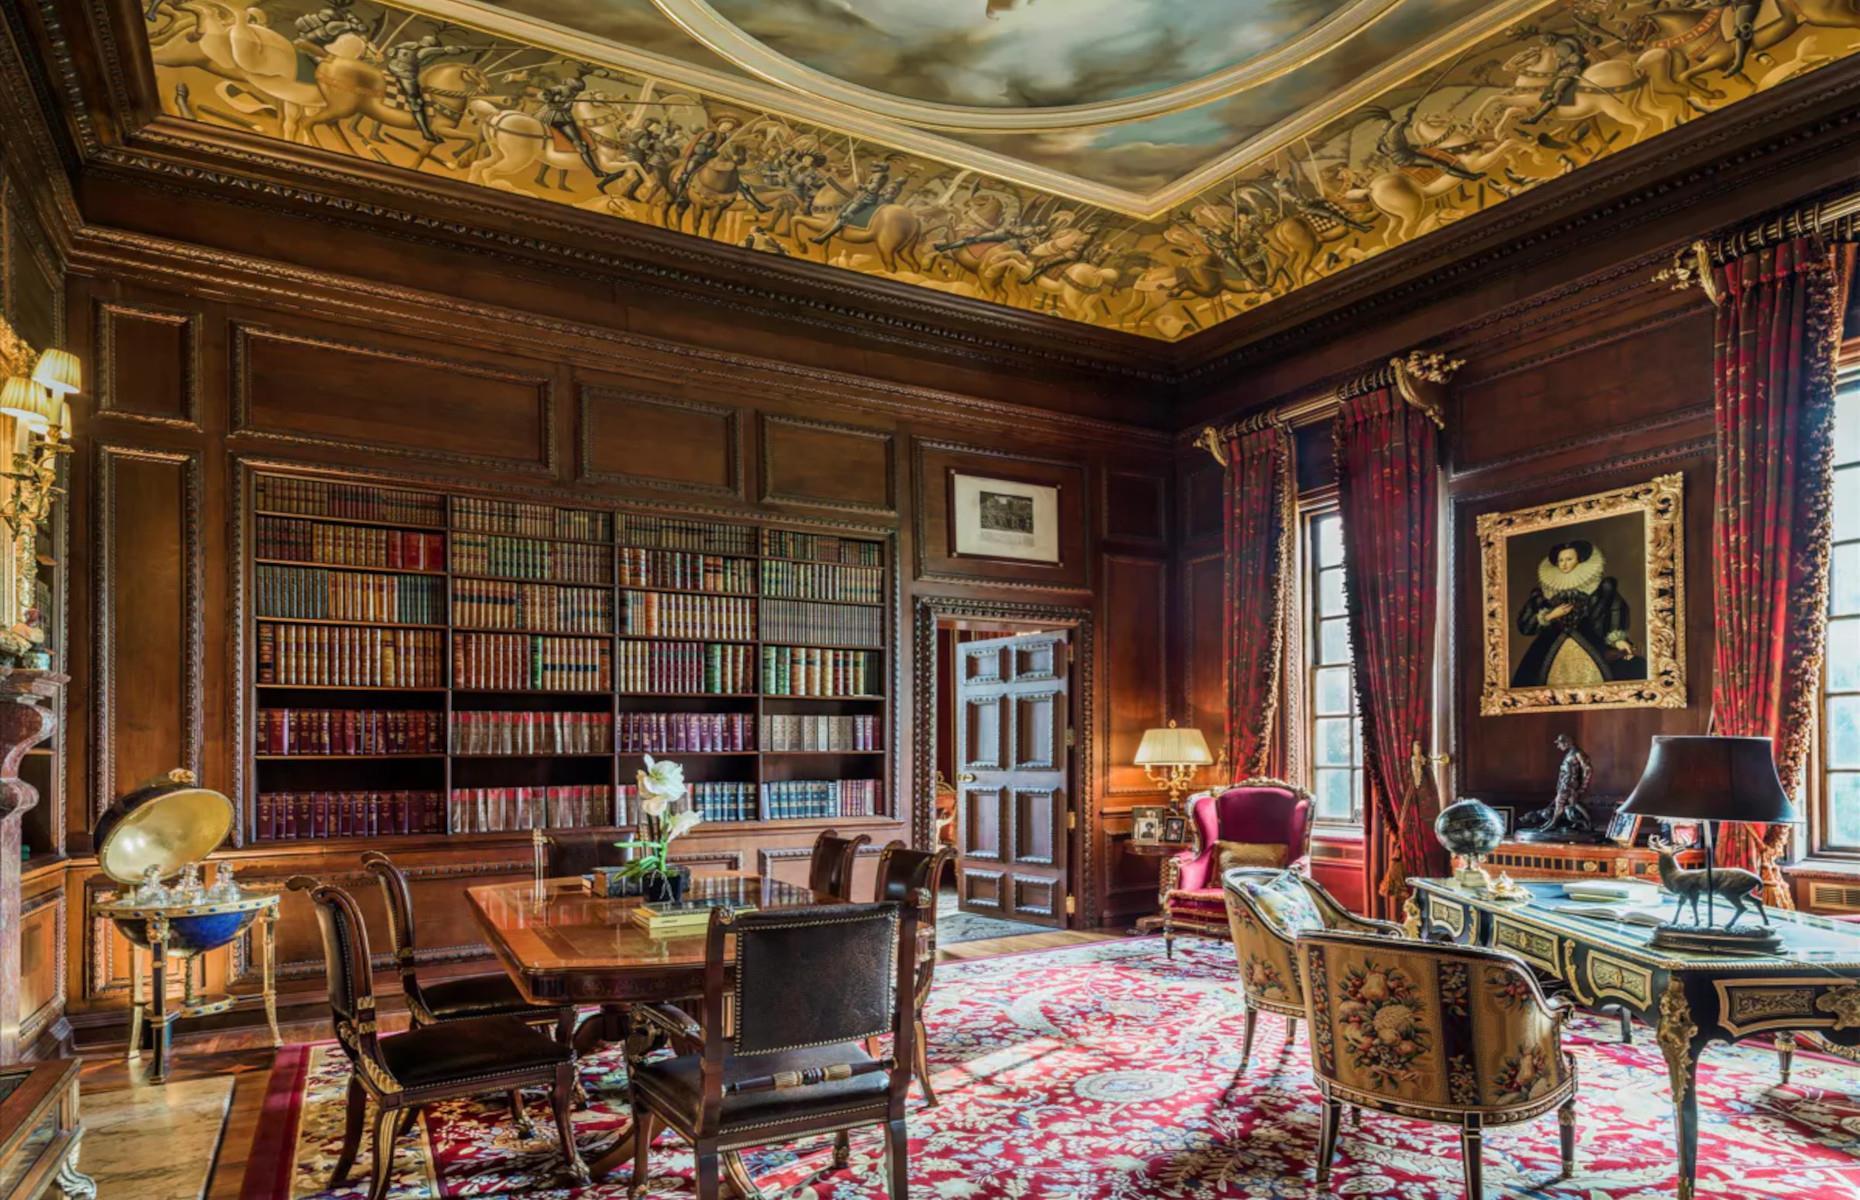 <p>The Grade I-listed manor house comprises a jaw-dropping 28,500 square feet of space, including 12 reception rooms, 12 bedroom suites, 14 bathrooms, family and catering kitchens, a private chapel, two staircases and an elevator.</p>  <p>As Morgan was a renowned art collector, the home is unsurprisingly well stocked with hand-painted ceiling frescos, custom crystal chandeliers, silk wall panels and curtains and even a handwoven carpet inspired by one in Buckingham Palace.</p>